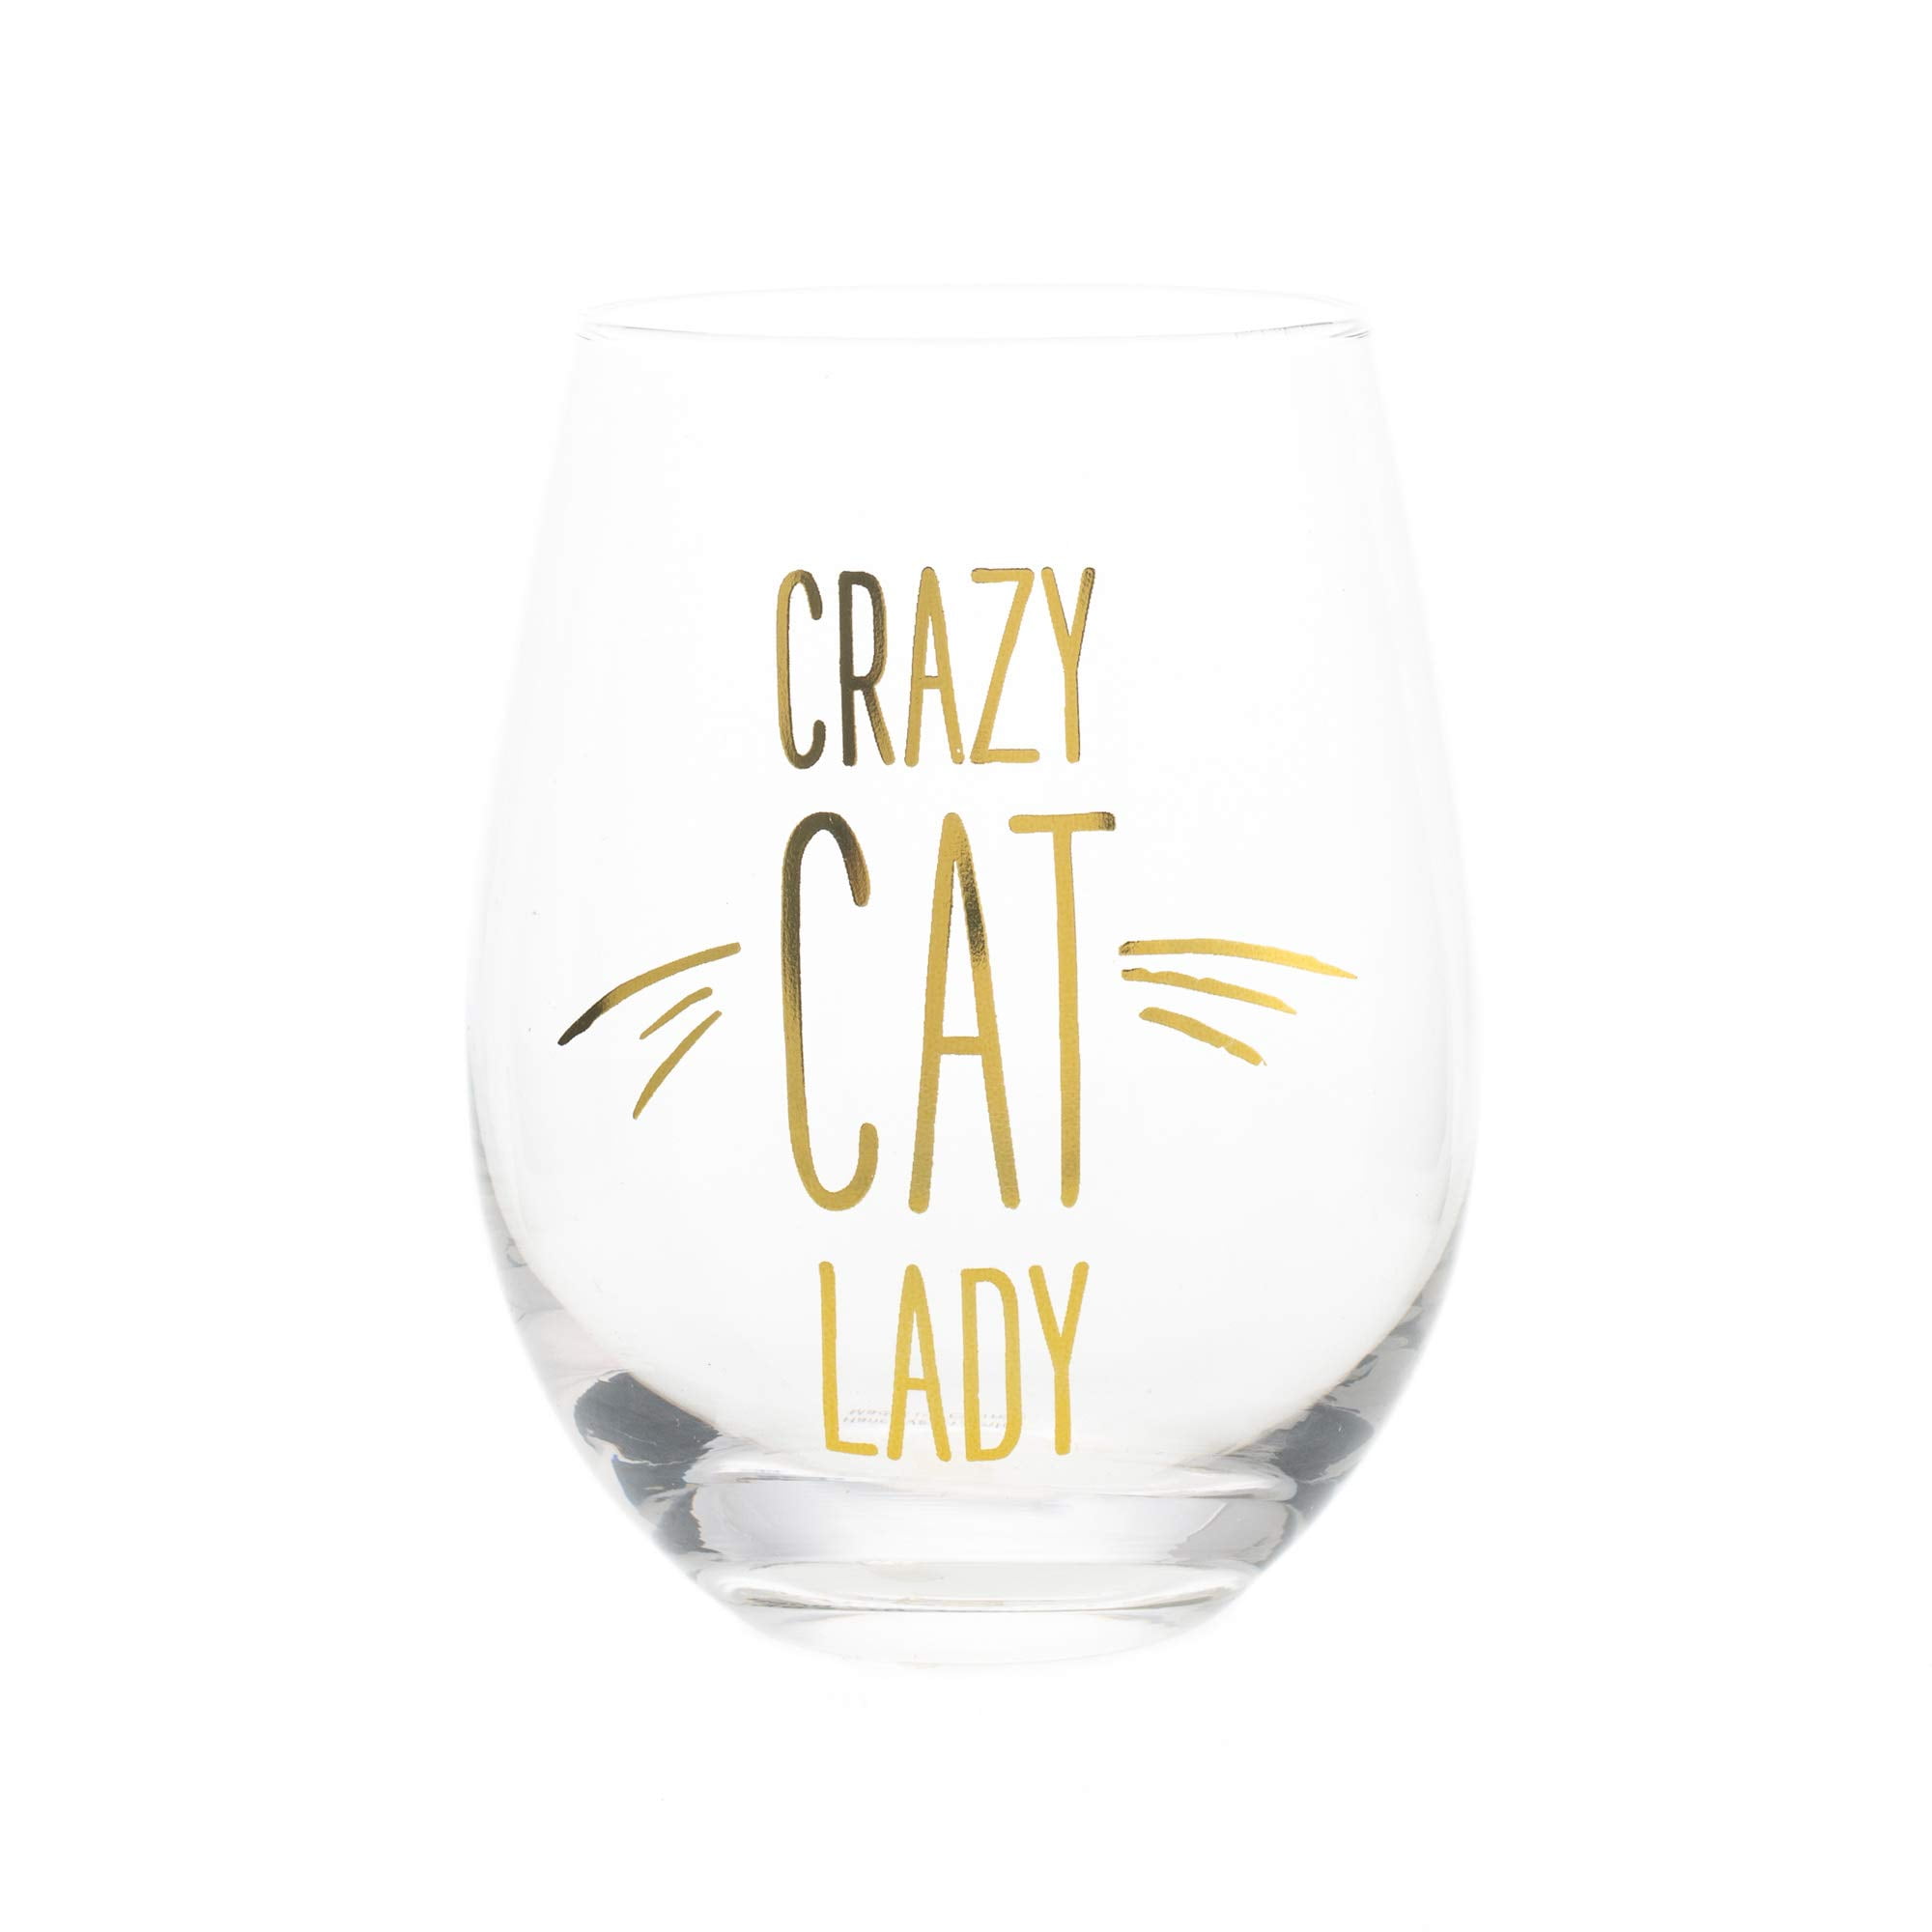 NEW IN BOX Mary Square Crazy Cat Lady 12oz Stemless Wine Glass FAST SHIPPING